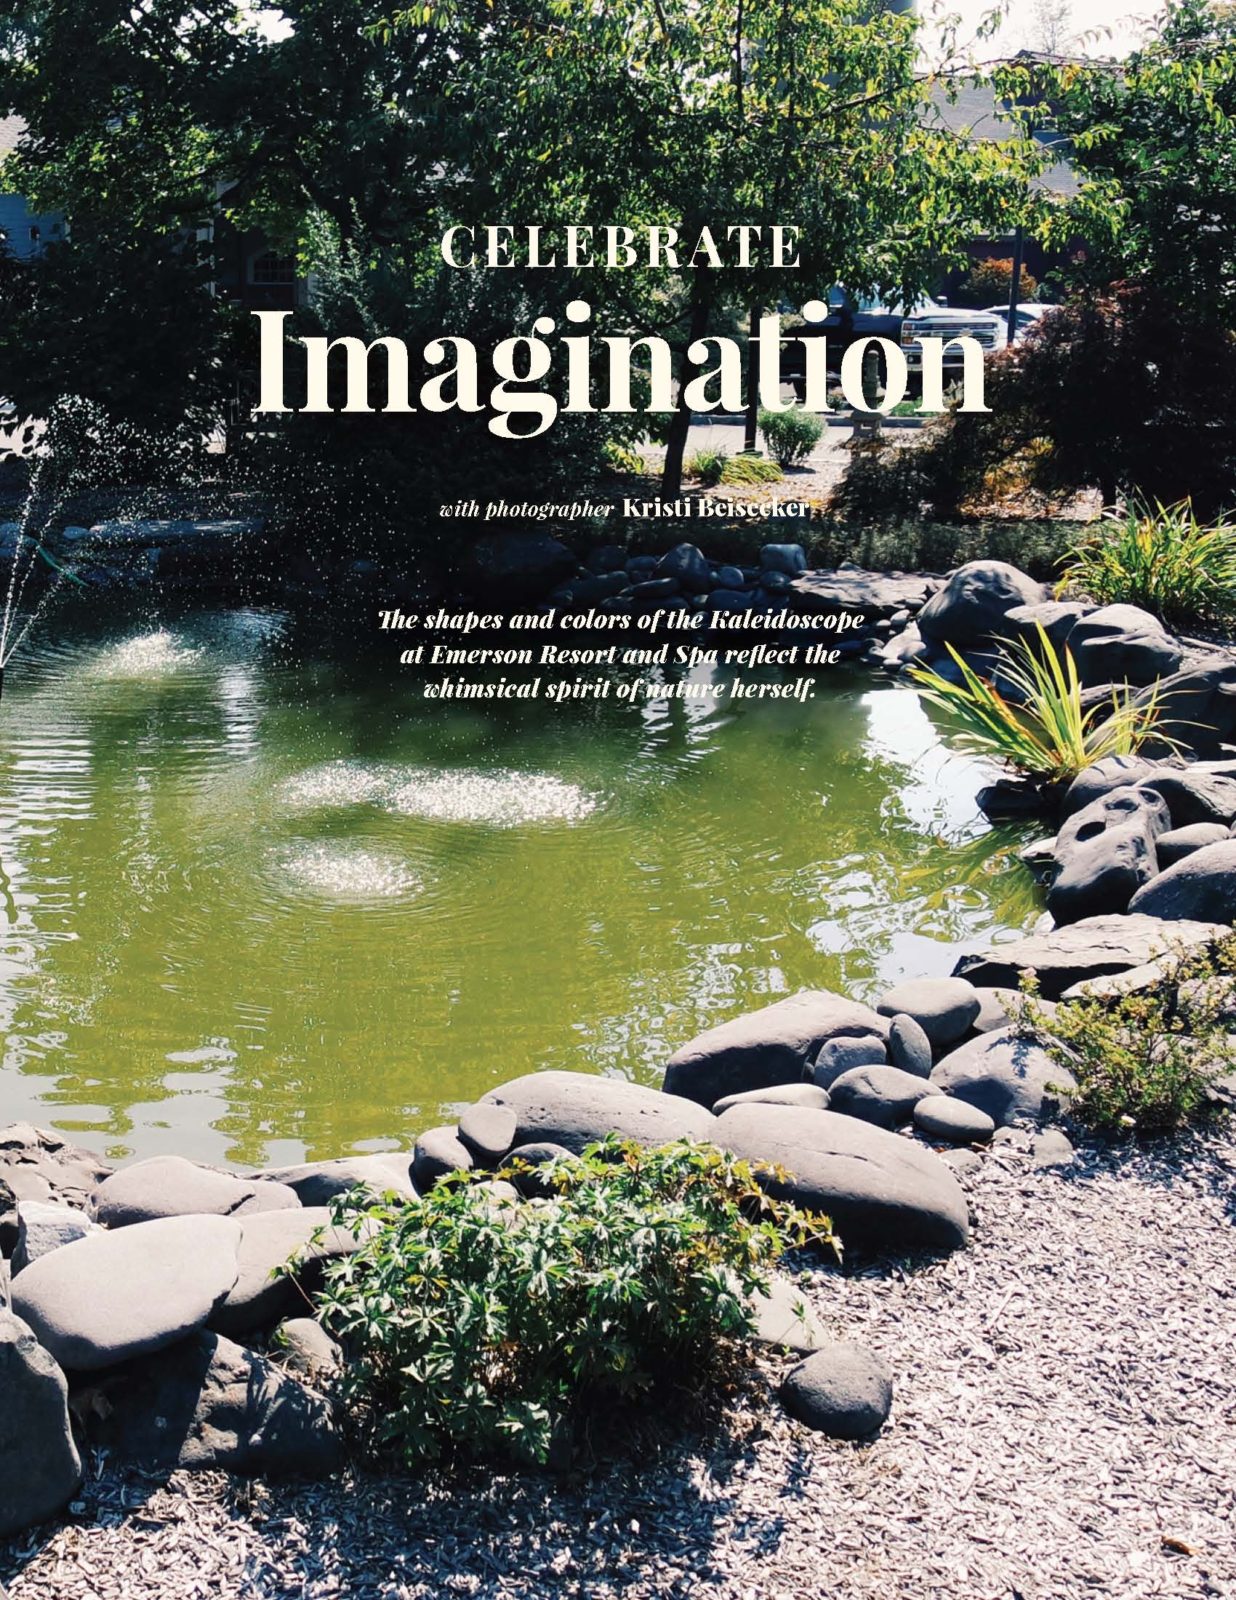 Published Article: The Perpetual You – Celebrate Imagination